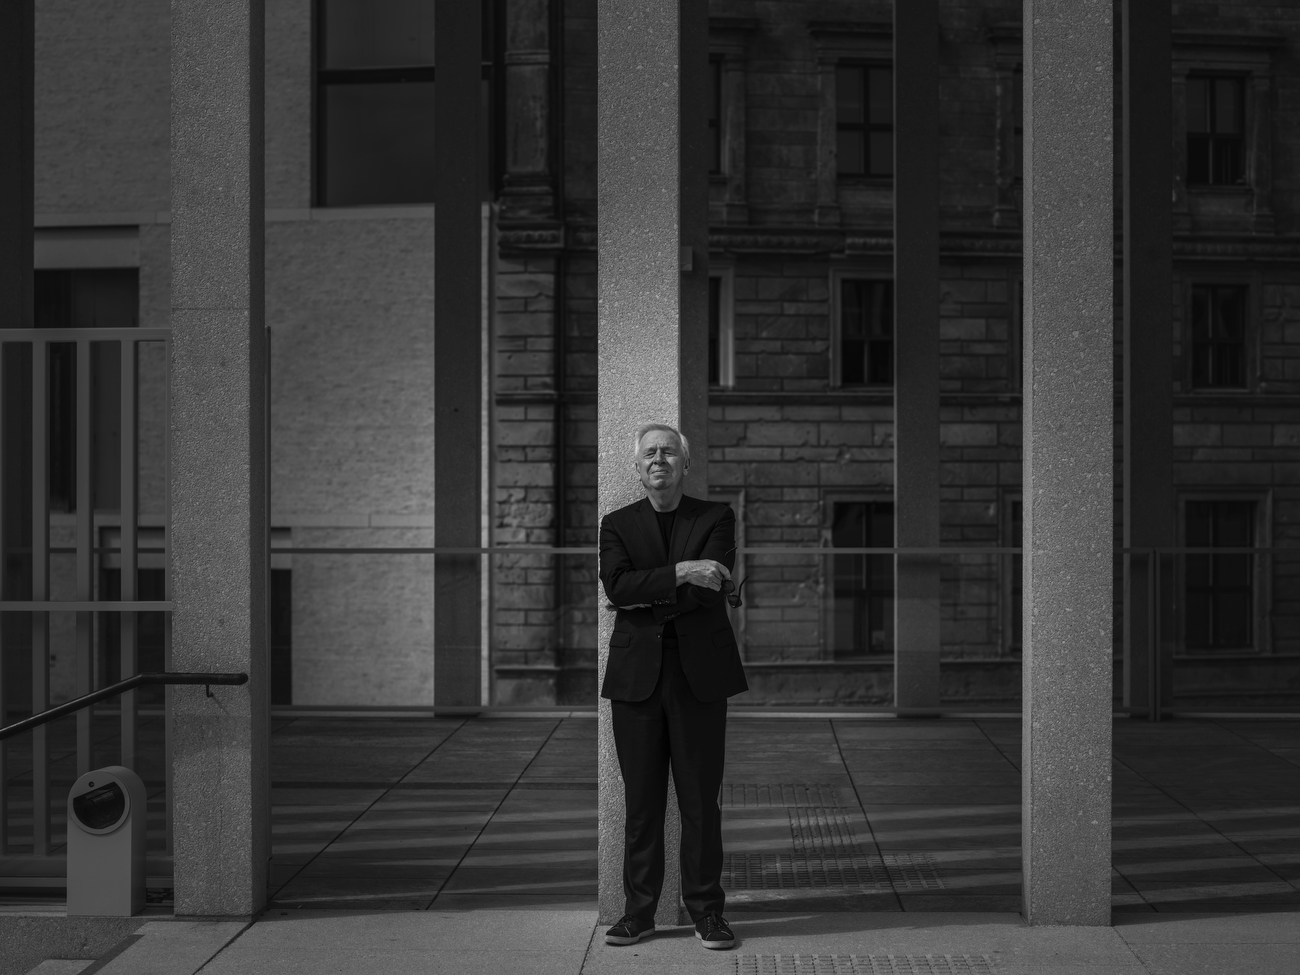 David Chipperfield, architect at James-Simon-Galerie